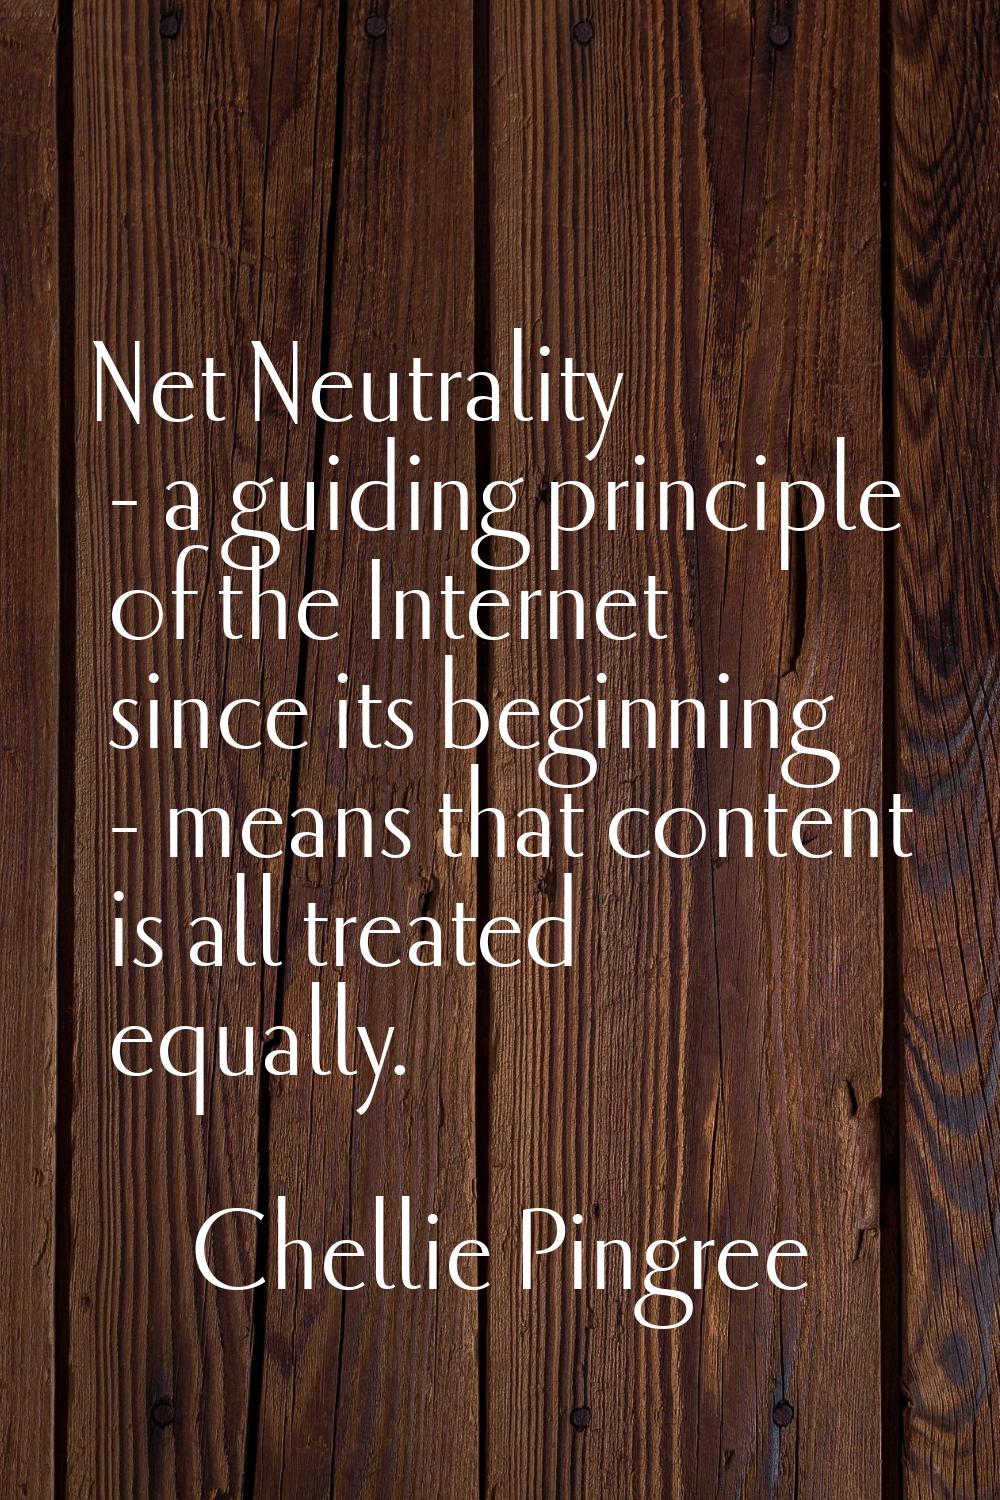 Net Neutrality - a guiding principle of the Internet since its beginning - means that content is al